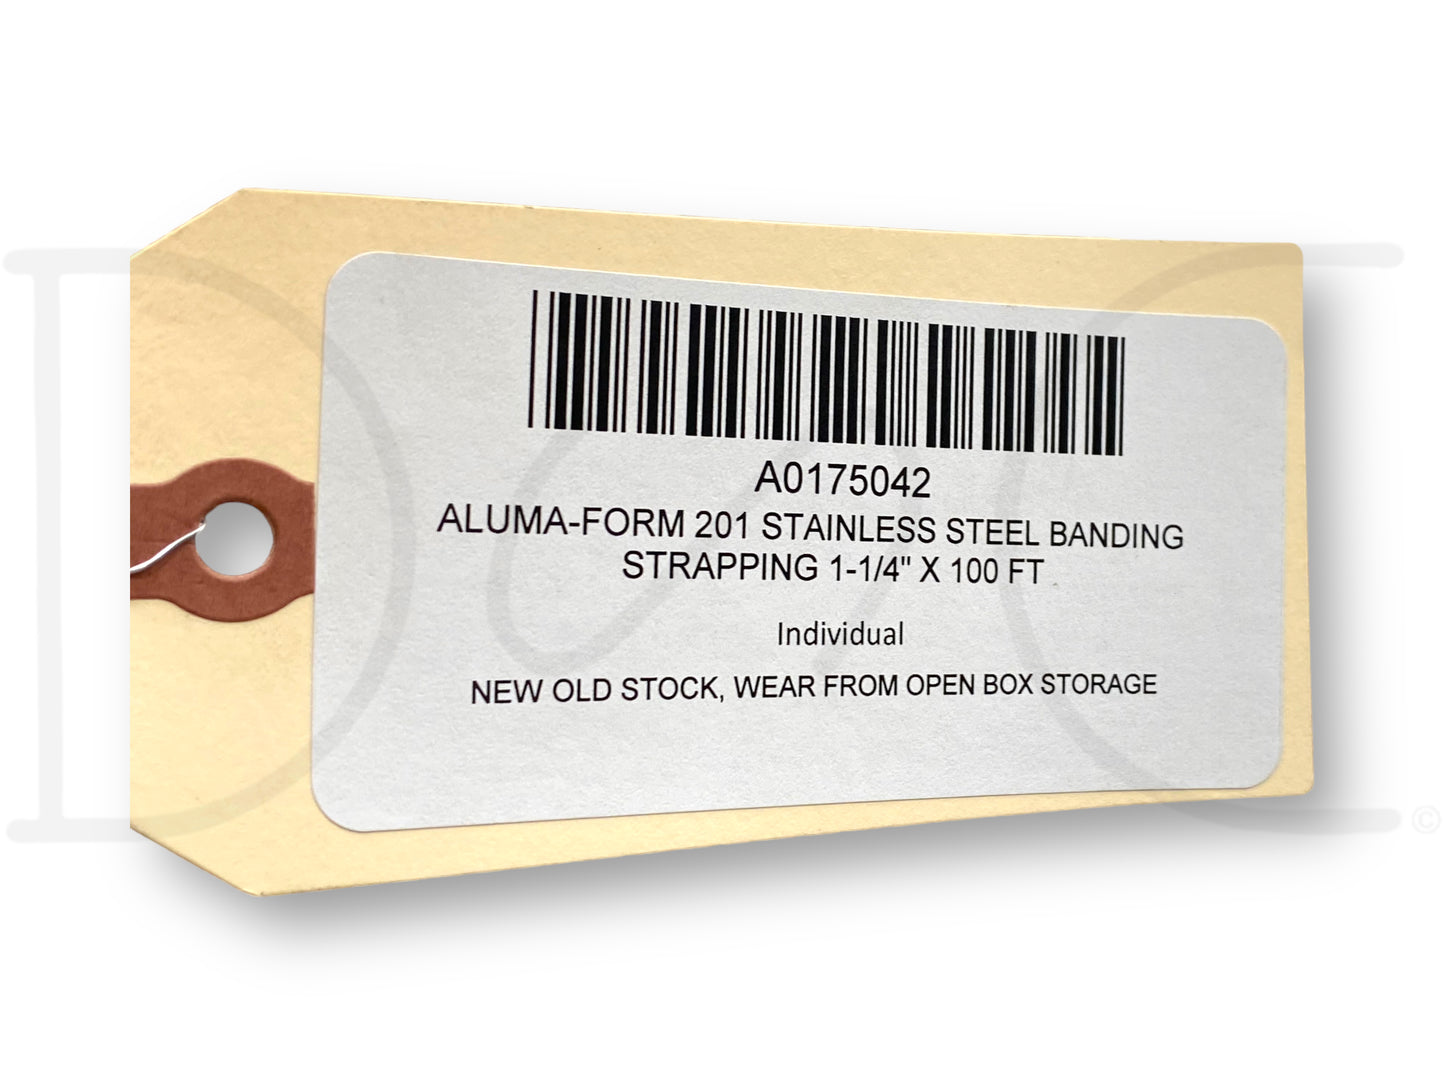 Aluma-Form 201 Stainless Steel Banding Strapping 1-1/4" X 100 Ft